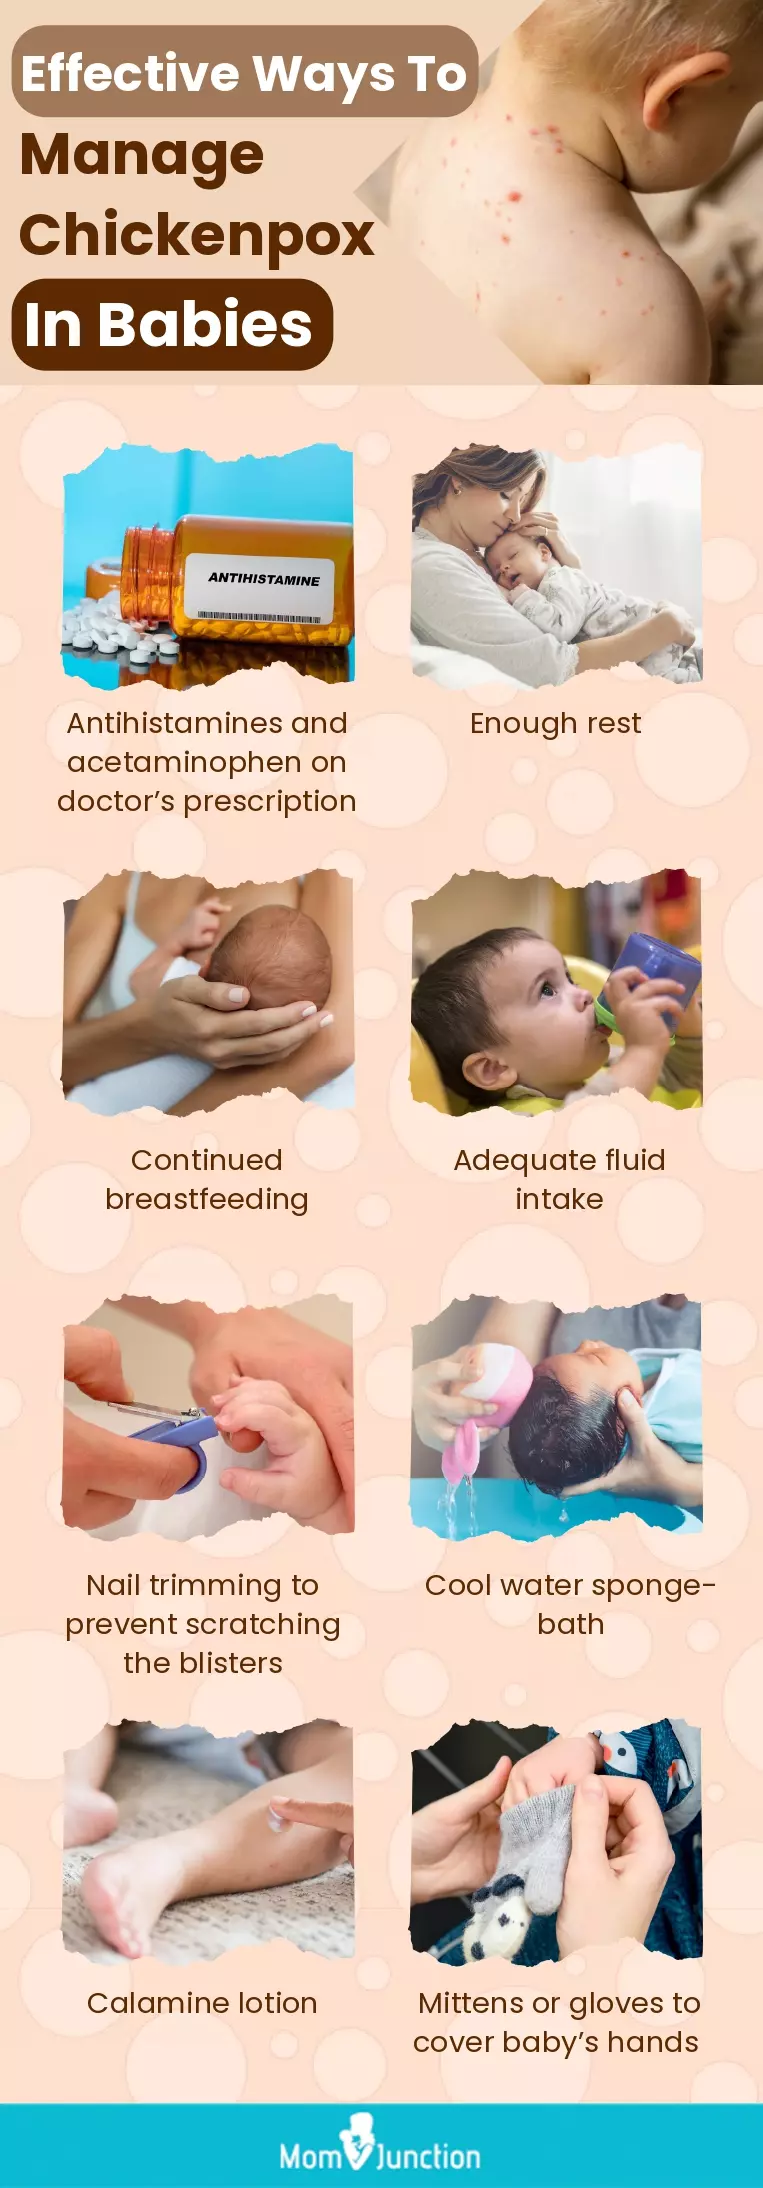 effective ways to manage chickenpox in babies (infographic)